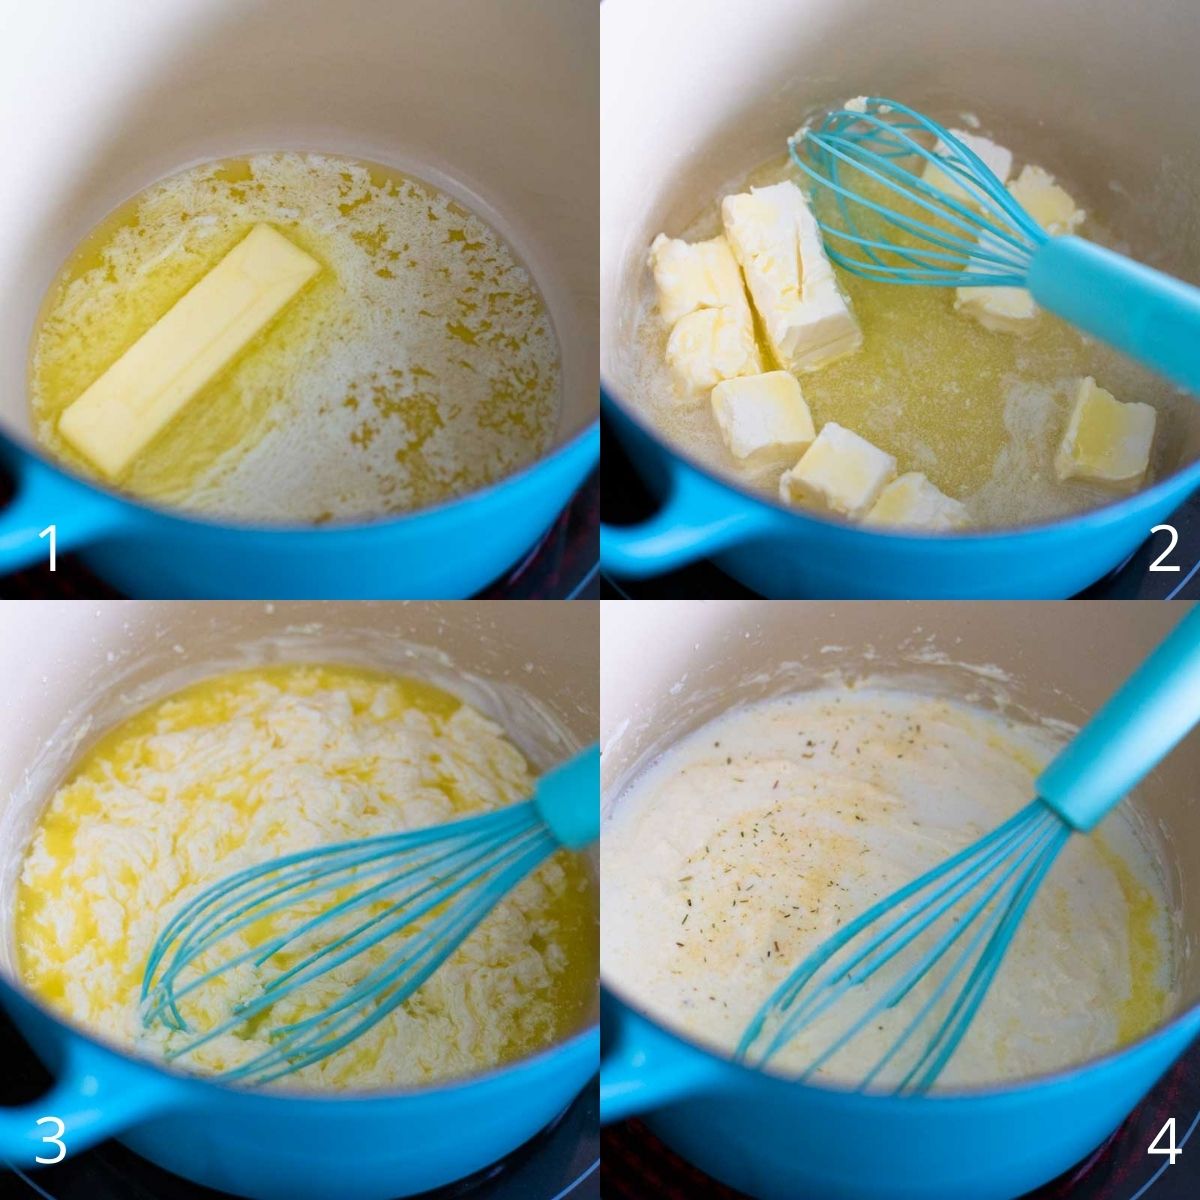 Step by step photos show how to melt the butter and add the cream cheese to make the alfredo sauce.